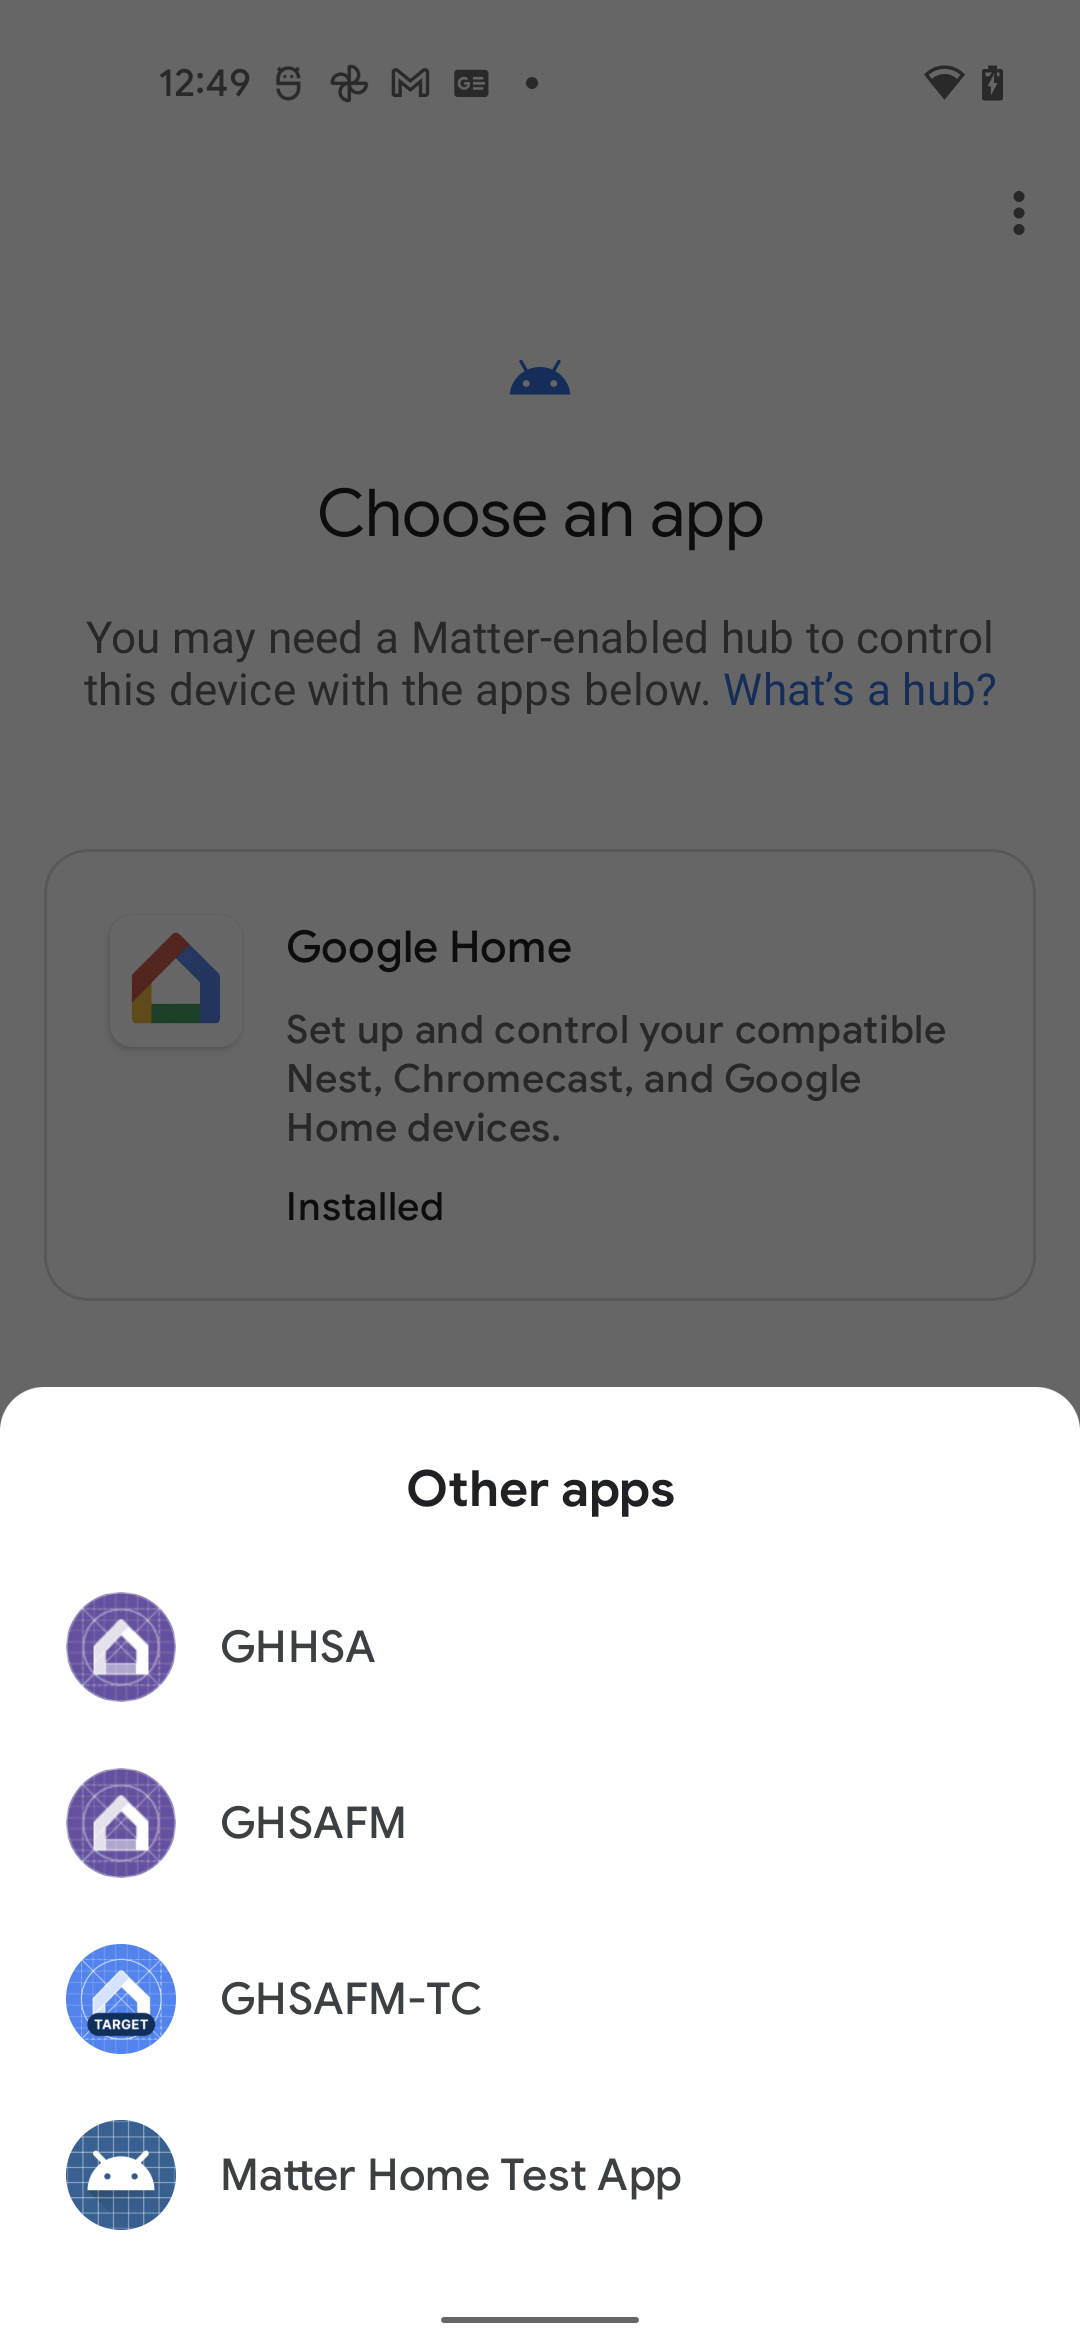 Choose an app - Other apps